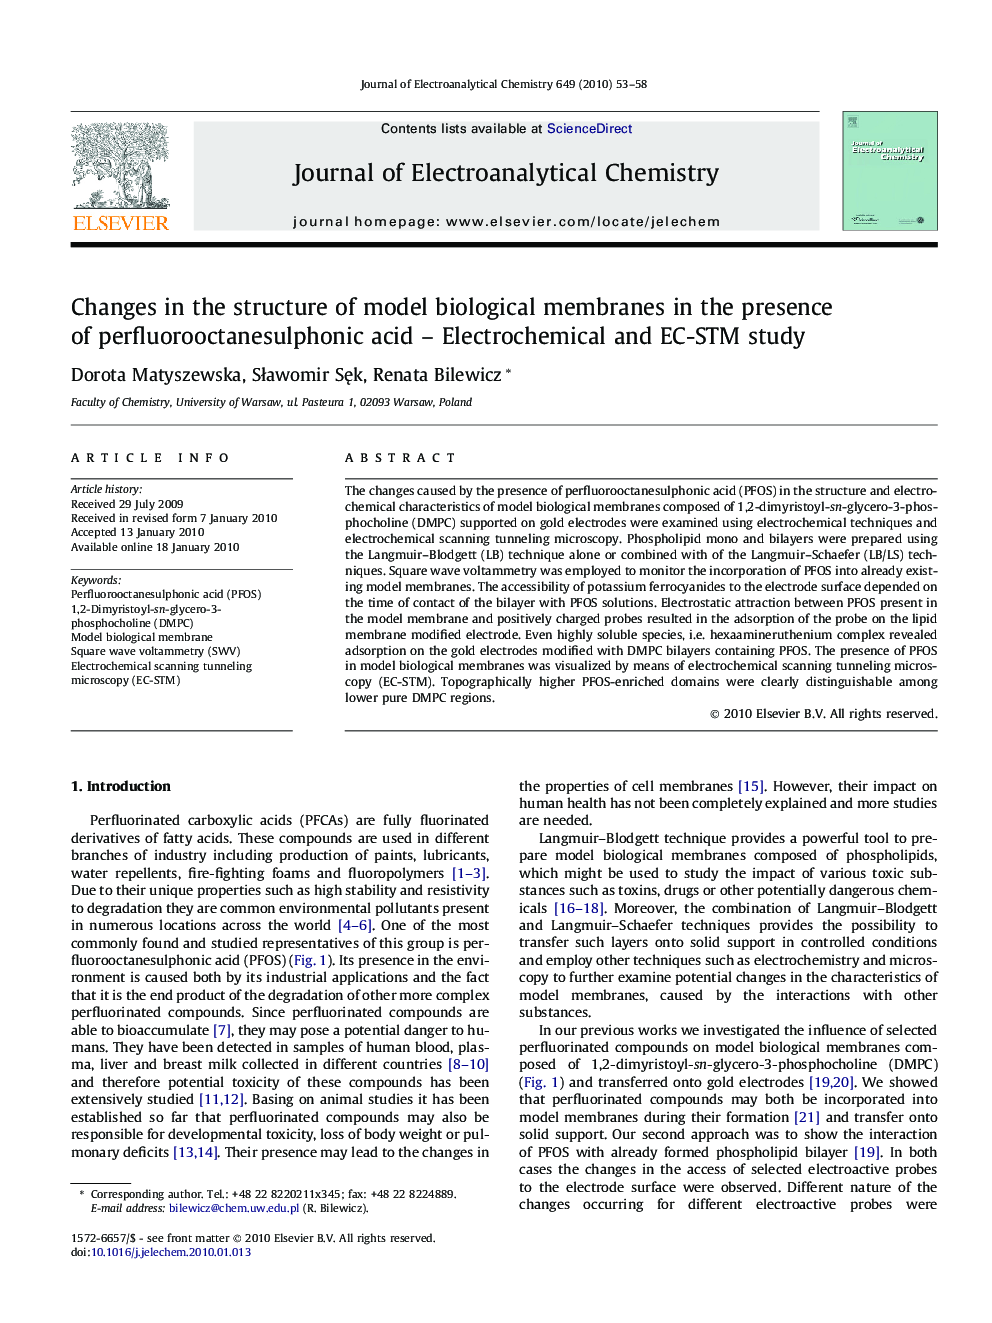 Changes in the structure of model biological membranes in the presence of perfluorooctanesulphonic acid – Electrochemical and EC-STM study